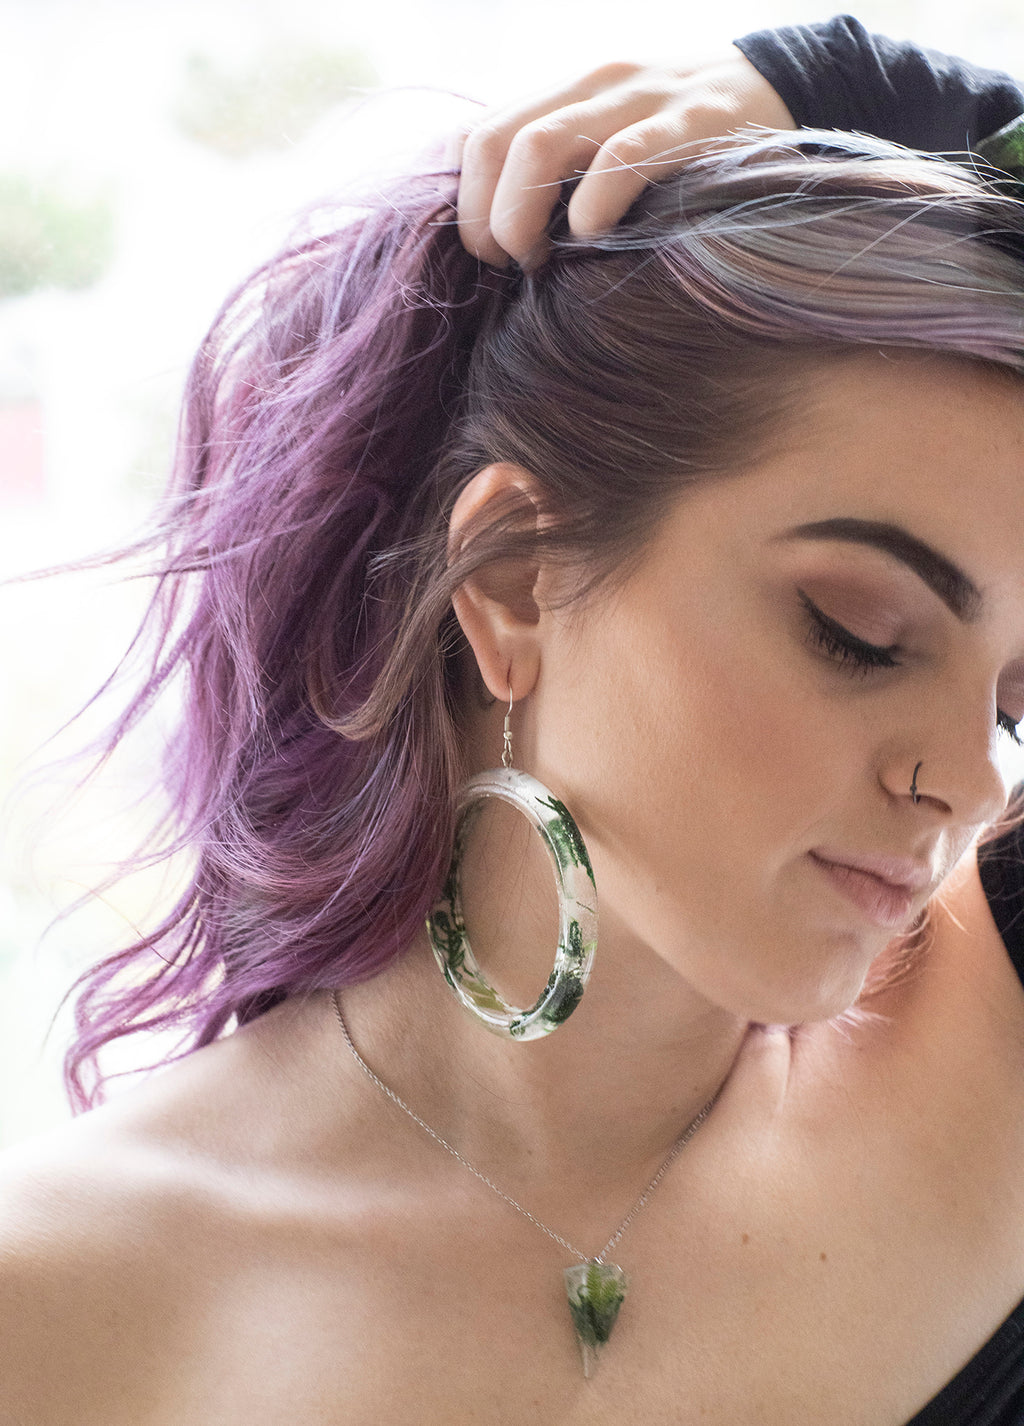 Model holding hair up, showing clear resin earrings with moss inside. 